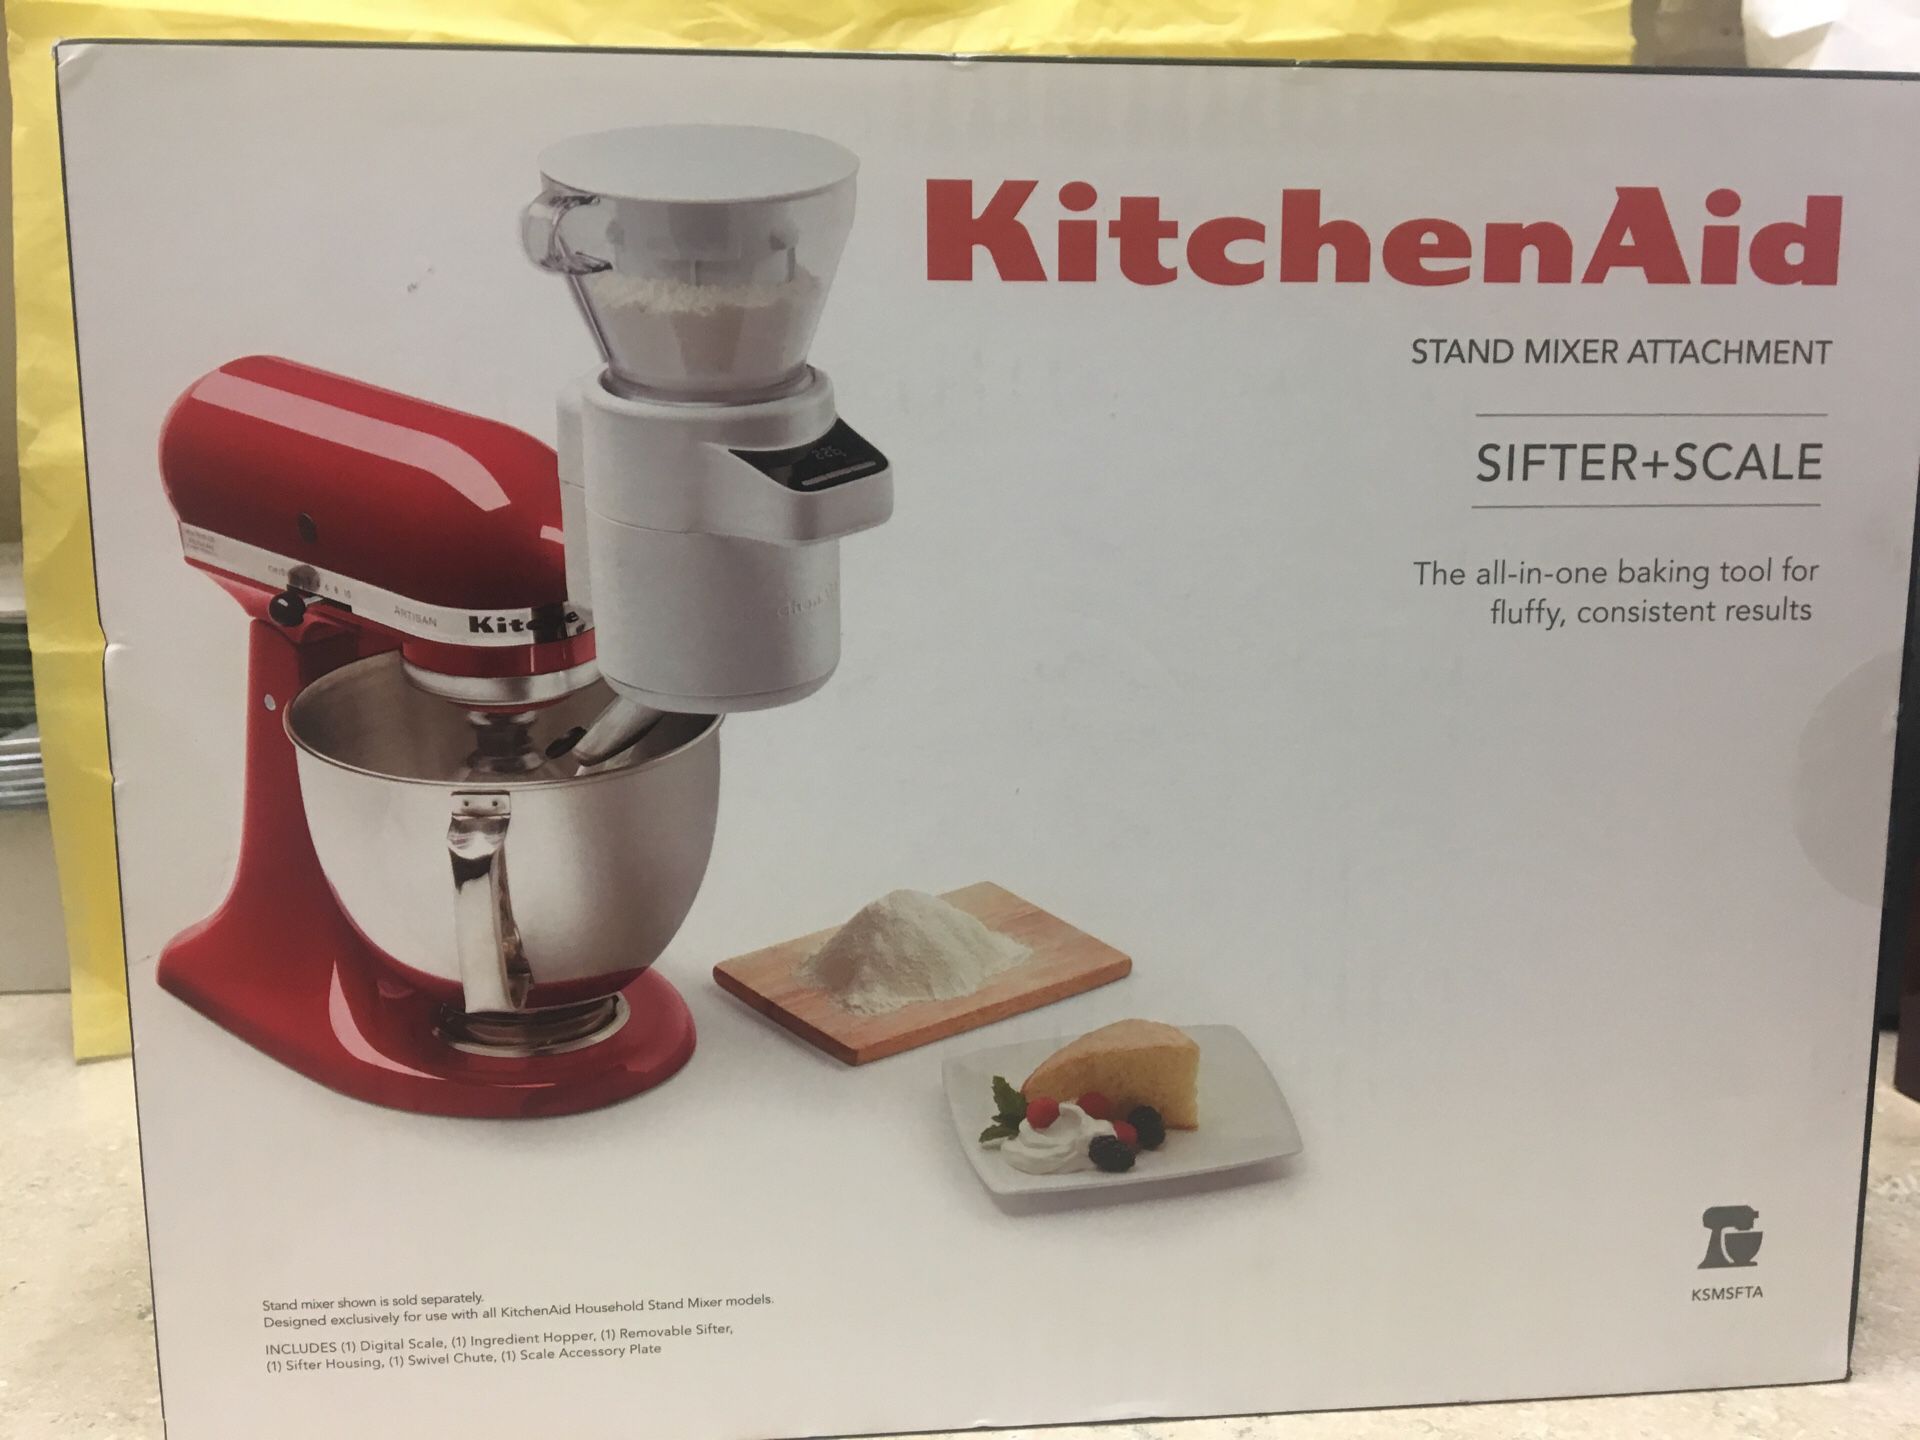 KitchenAid, Kitchen, Kitchen A Sifter And Scale